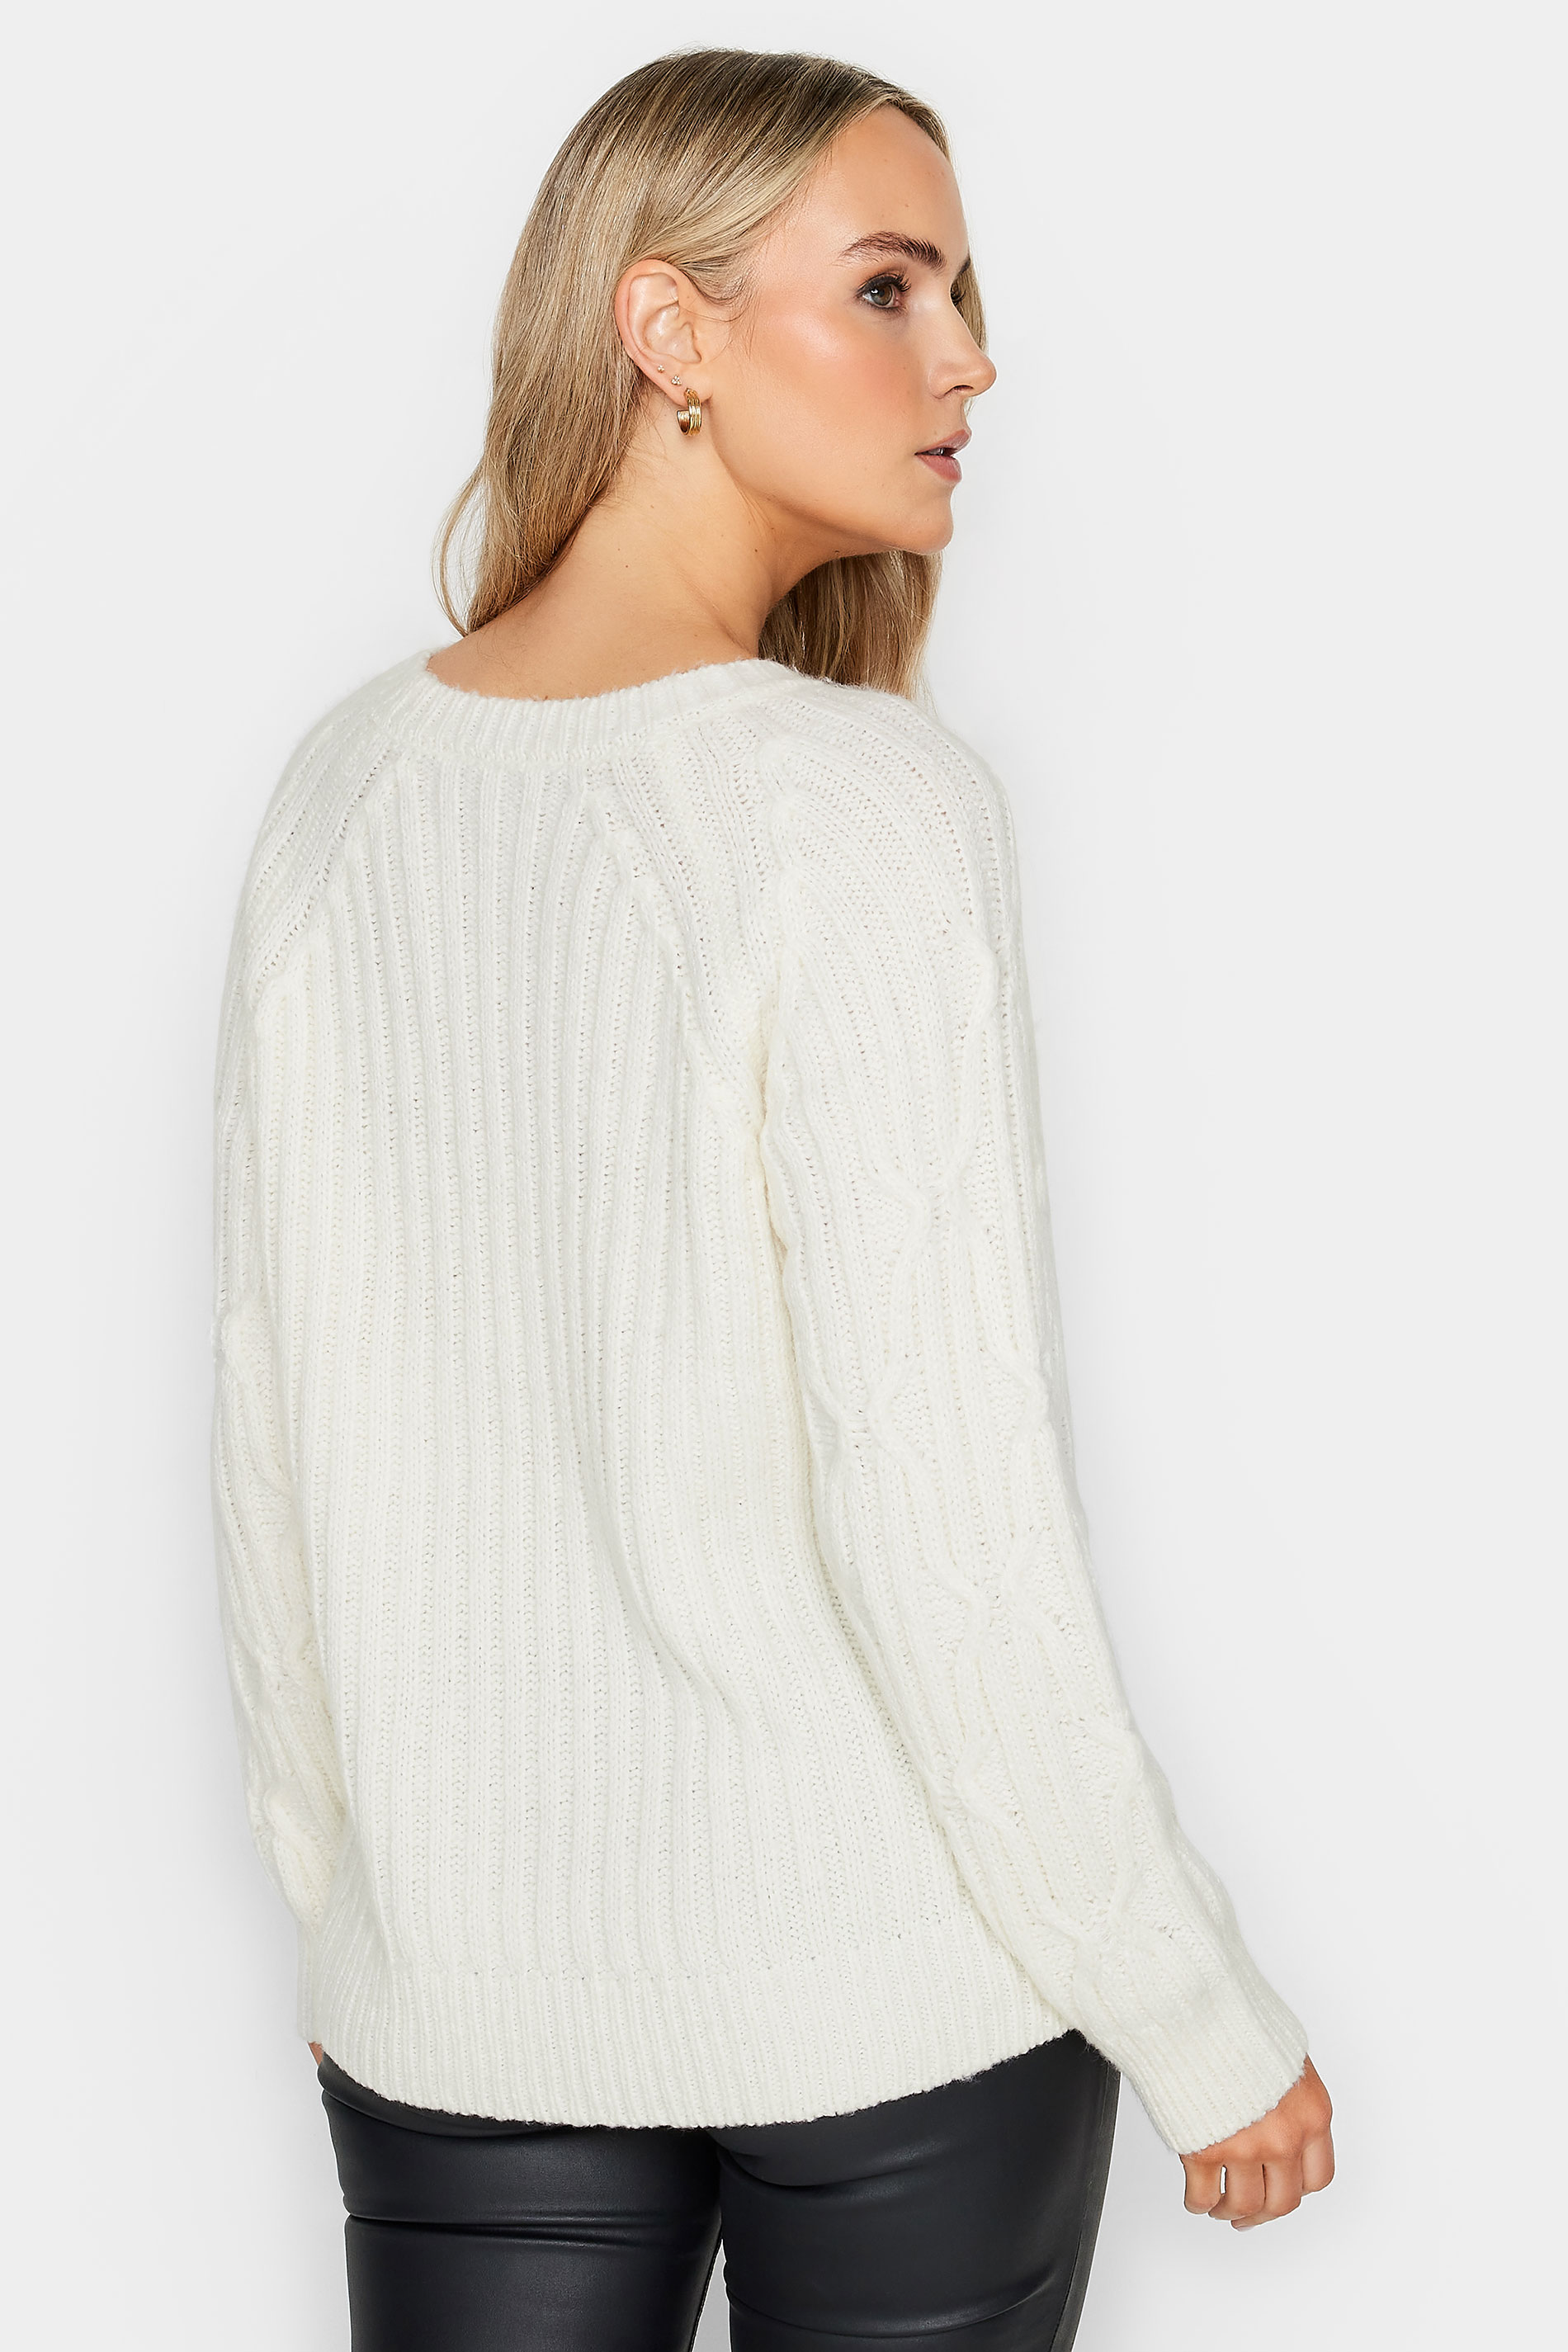 LTS Tall White Chunky Cable Knit Jumper | Long Tall Sally 3